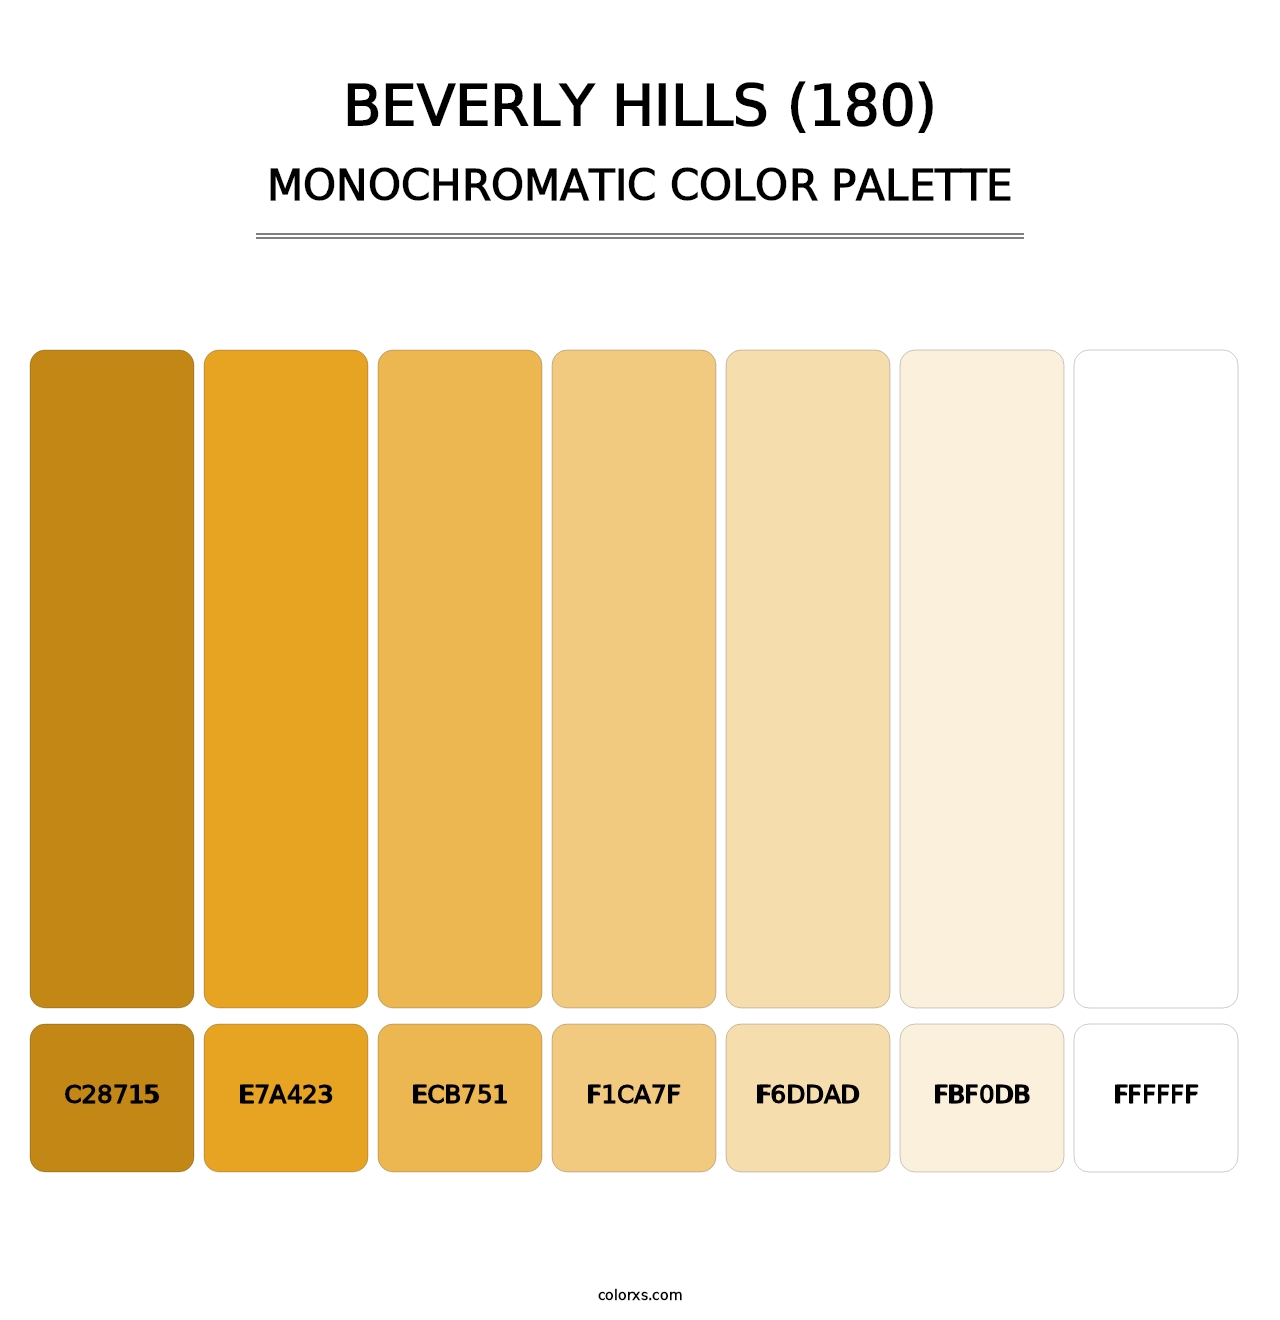 Beverly Hills (180) - Monochromatic Color Palette